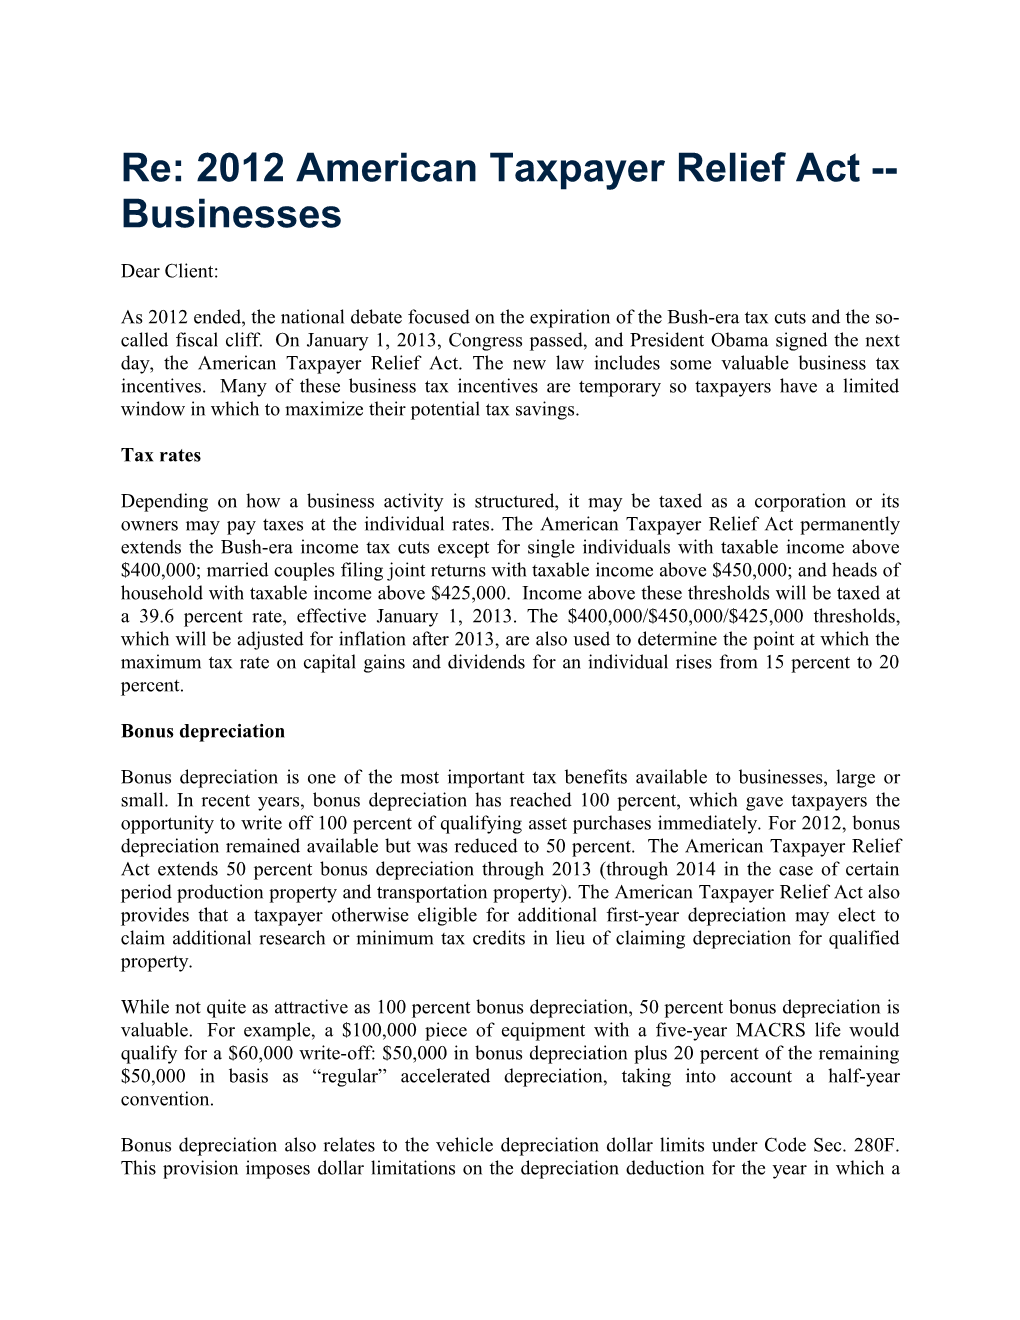 Re: 2012 American Taxpayer Relief Act Businesses